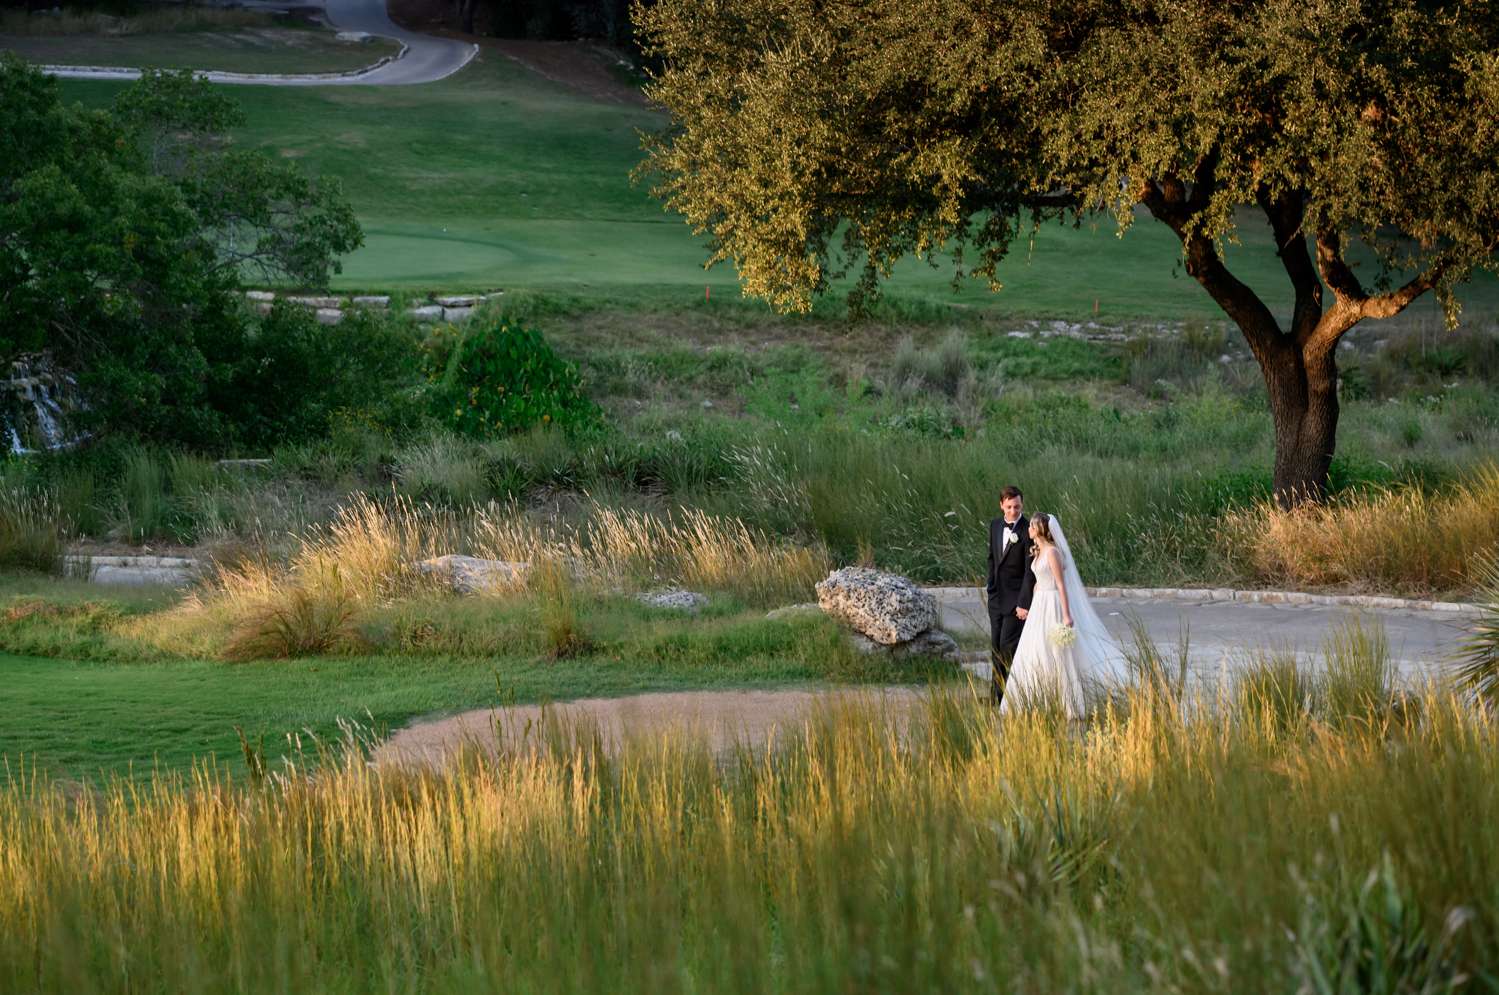 The bride and groom walk through a path on the golf course 